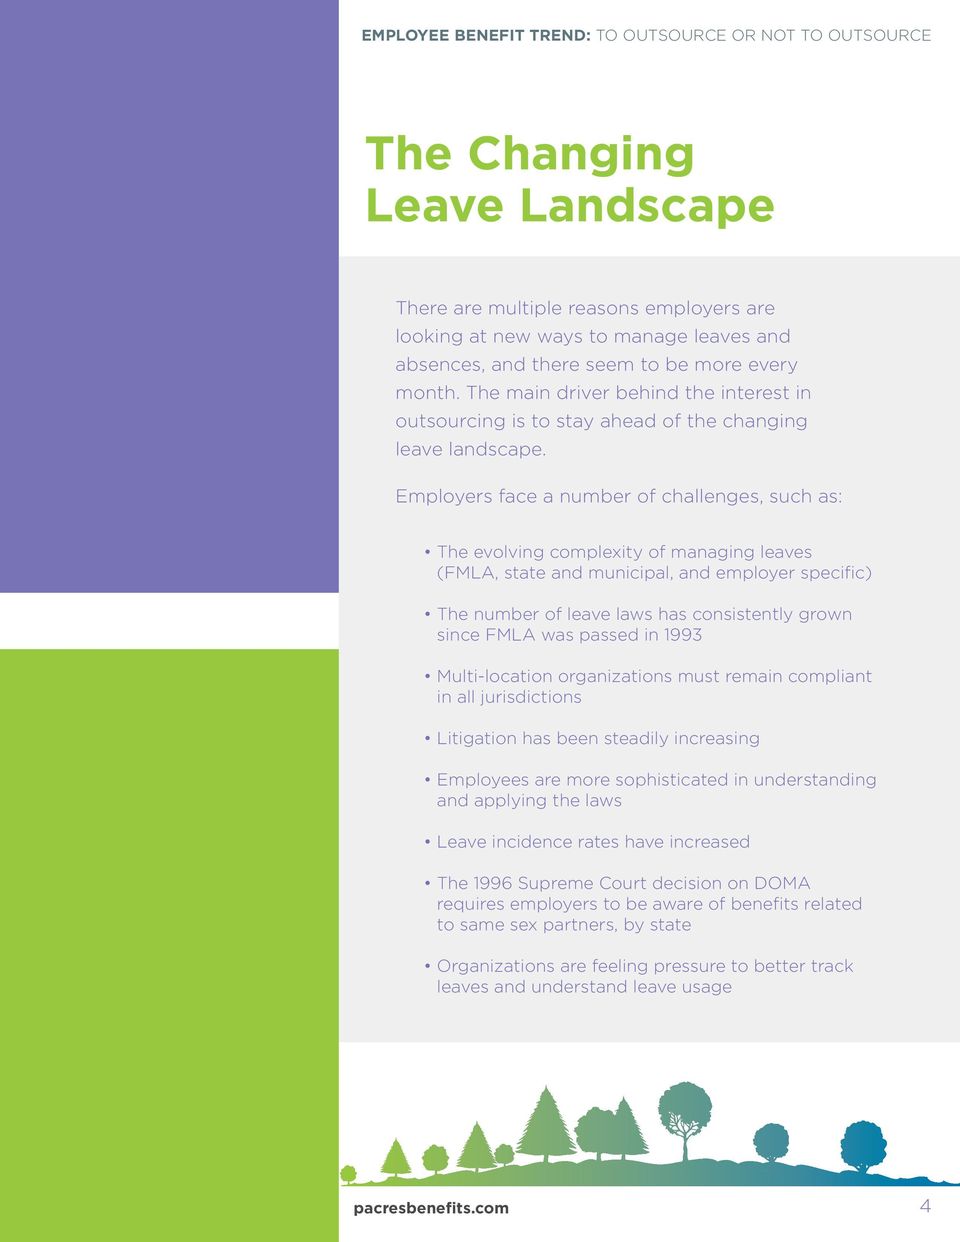 Employers face a number of challenges, such as: The evolving complexity of managing leaves (FMLA, state and municipal, and employer specific) The number of leave laws has consistently grown since